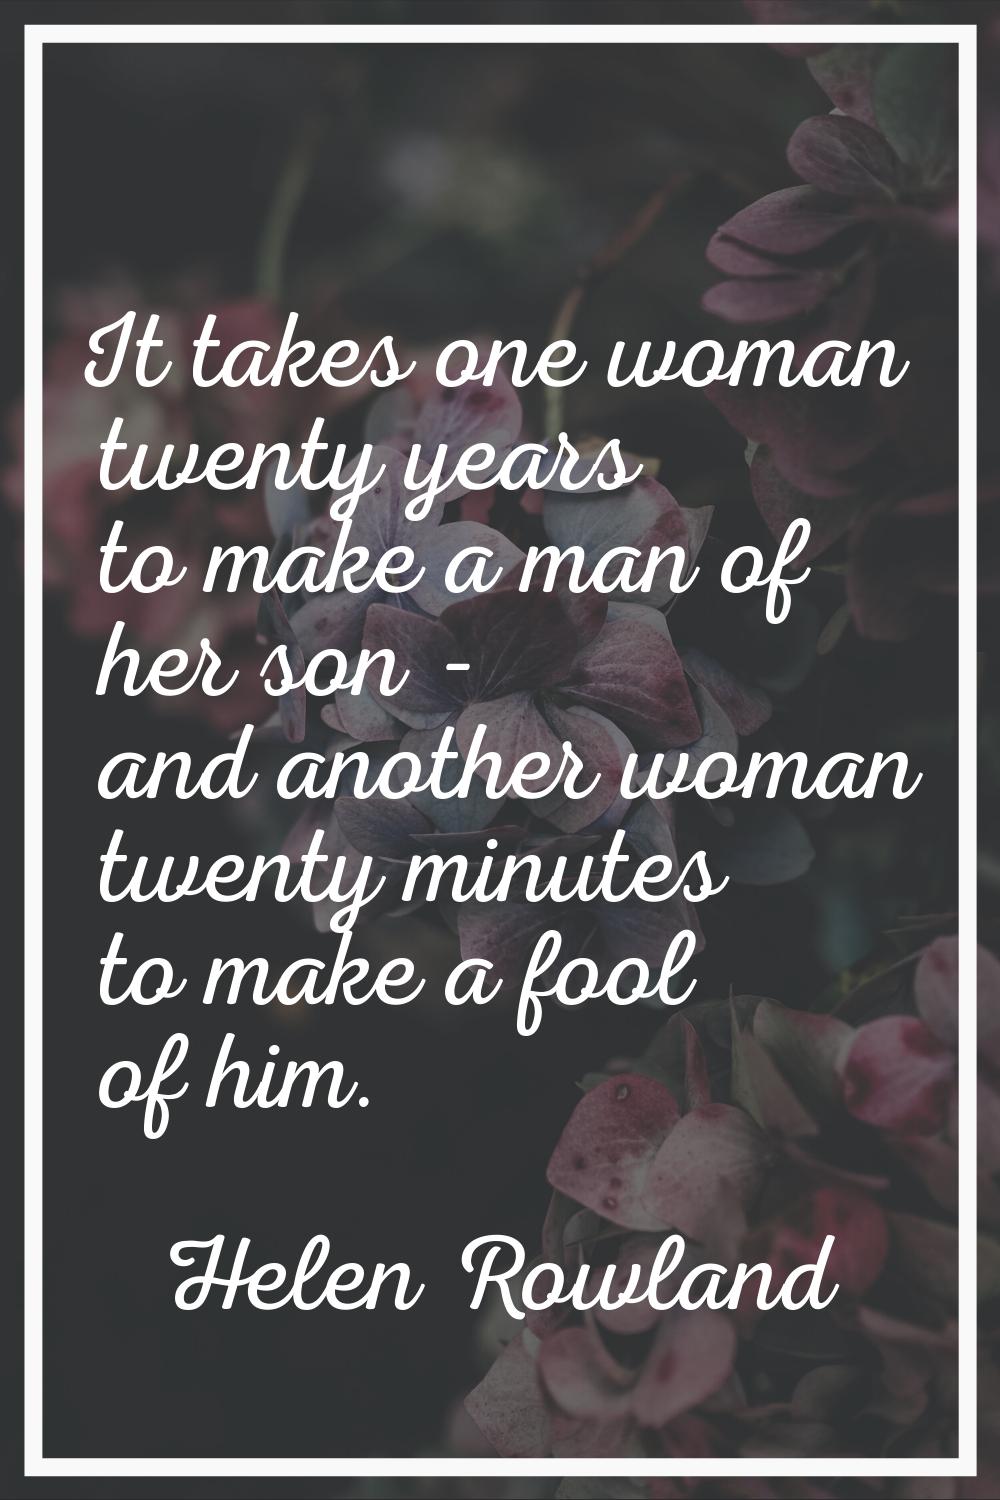 It takes one woman twenty years to make a man of her son - and another woman twenty minutes to make